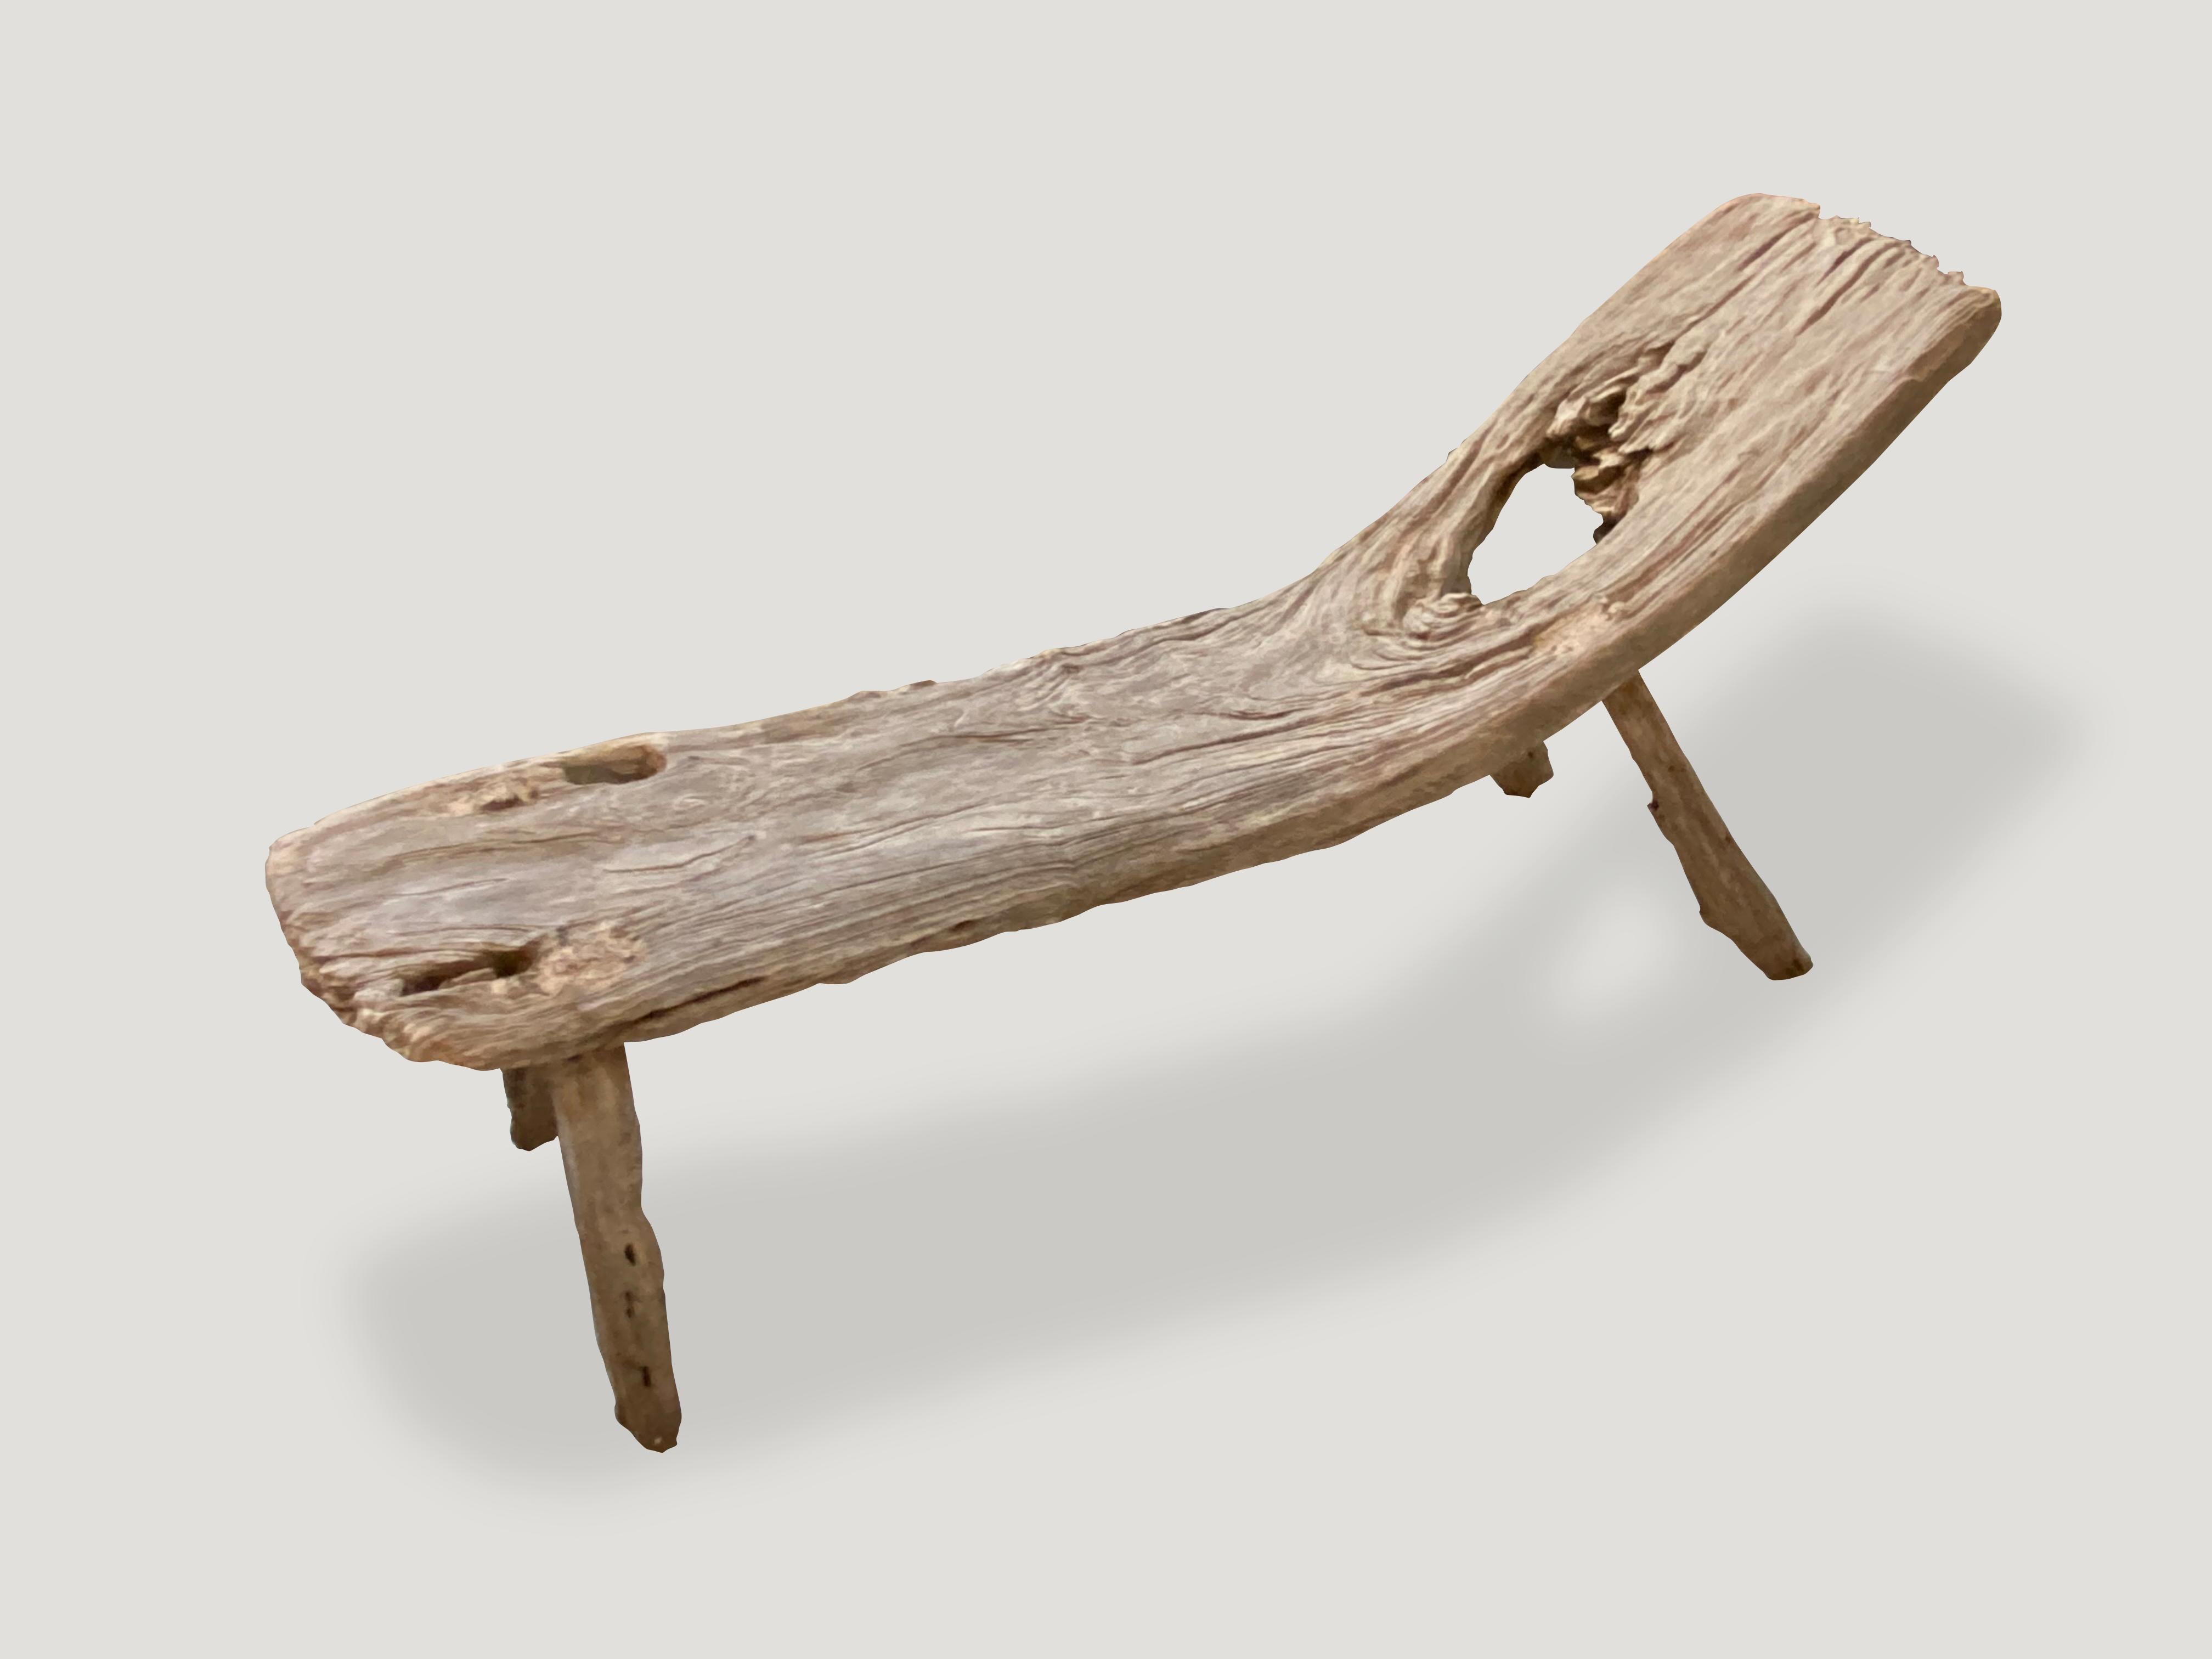 Beautiful antique bench with stunning erosion on the ends. A single thick slab with a natural incline. Fabulous in a modern residence as an art object and also usable.

This bench or chaise was sourced in the spirit of wabi-sabi, a Japanese